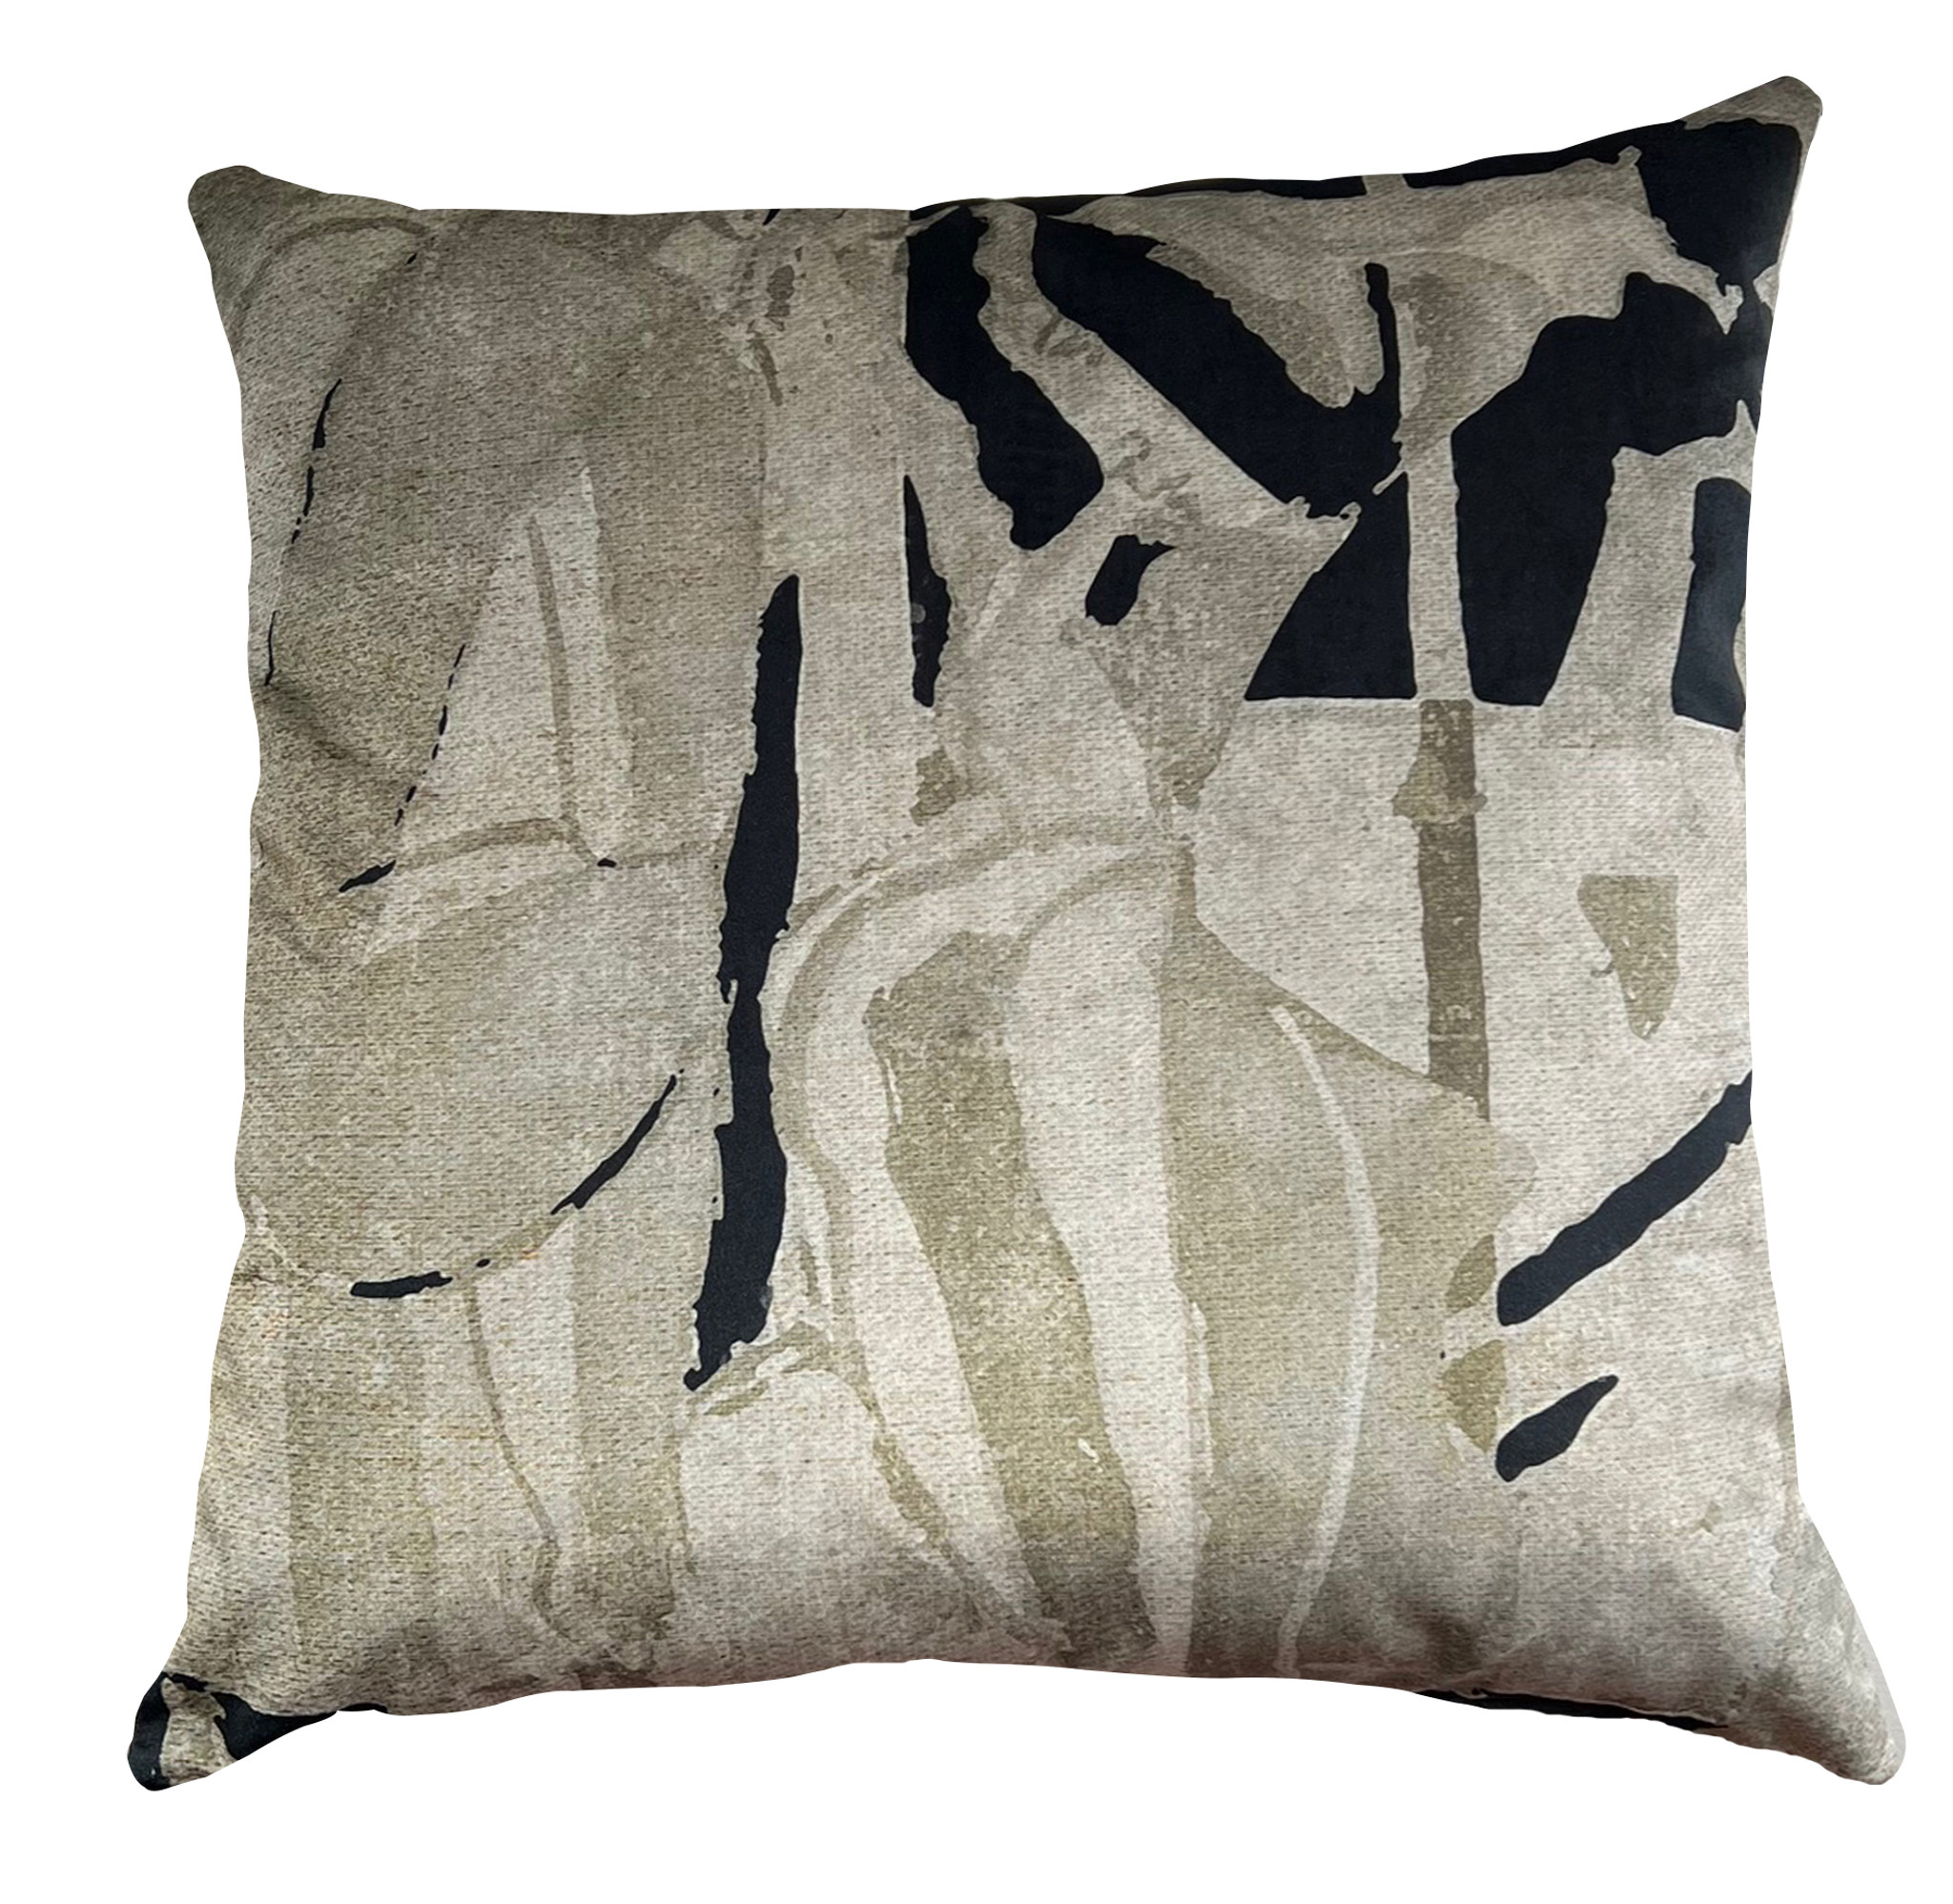 Cushion Cover - Composition with Figures